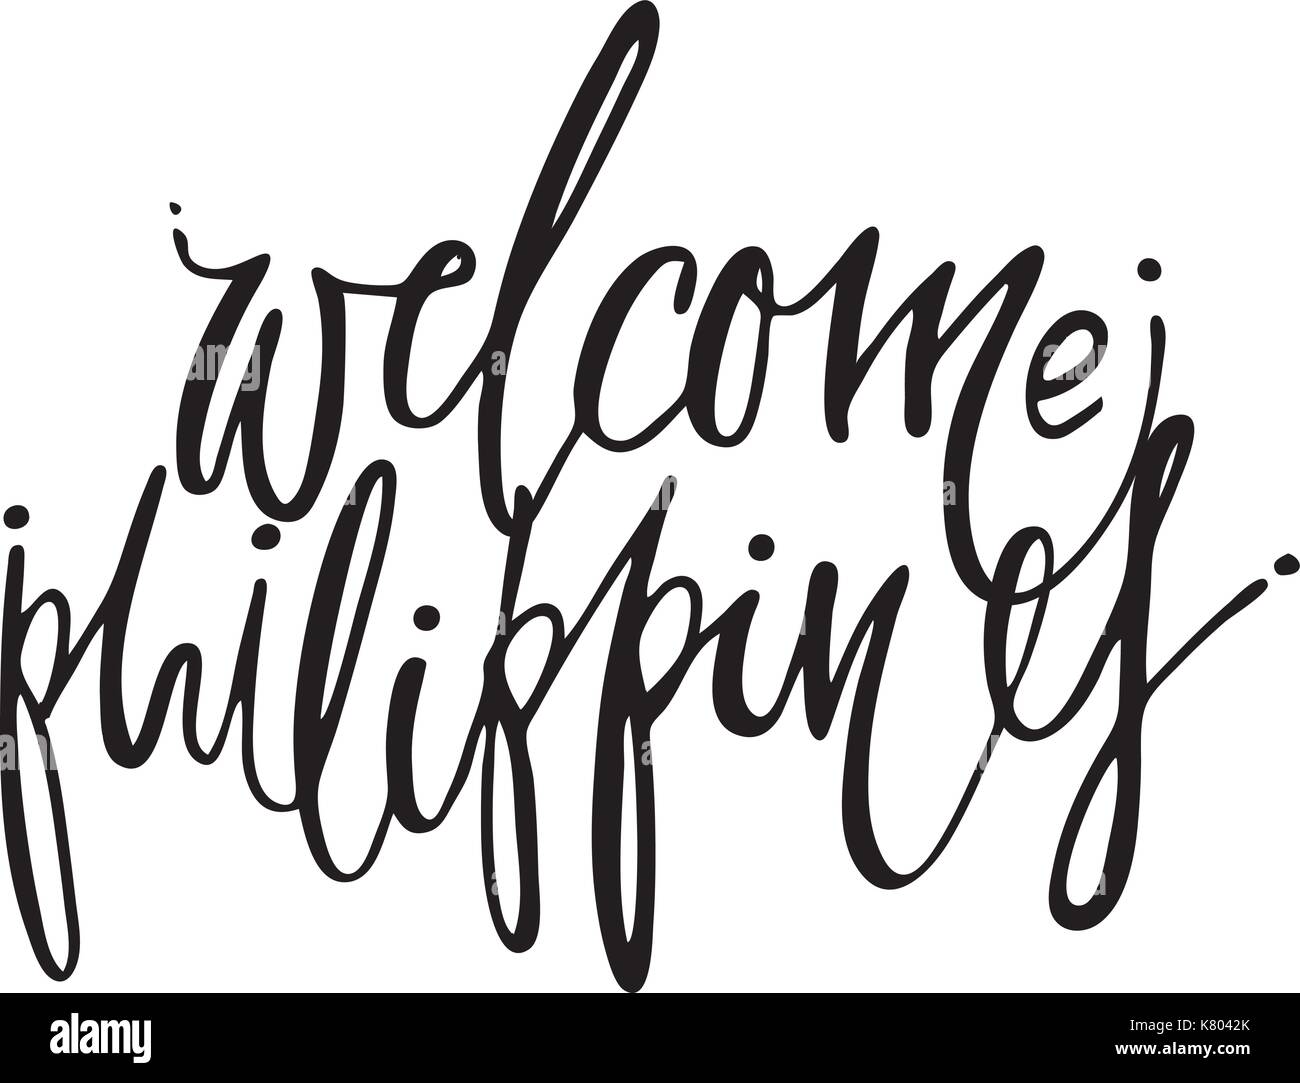 Welcom philippines hand lettering design for posters, t-shirts, cards, invitations, stickers, banners. Vector. Stock Vector